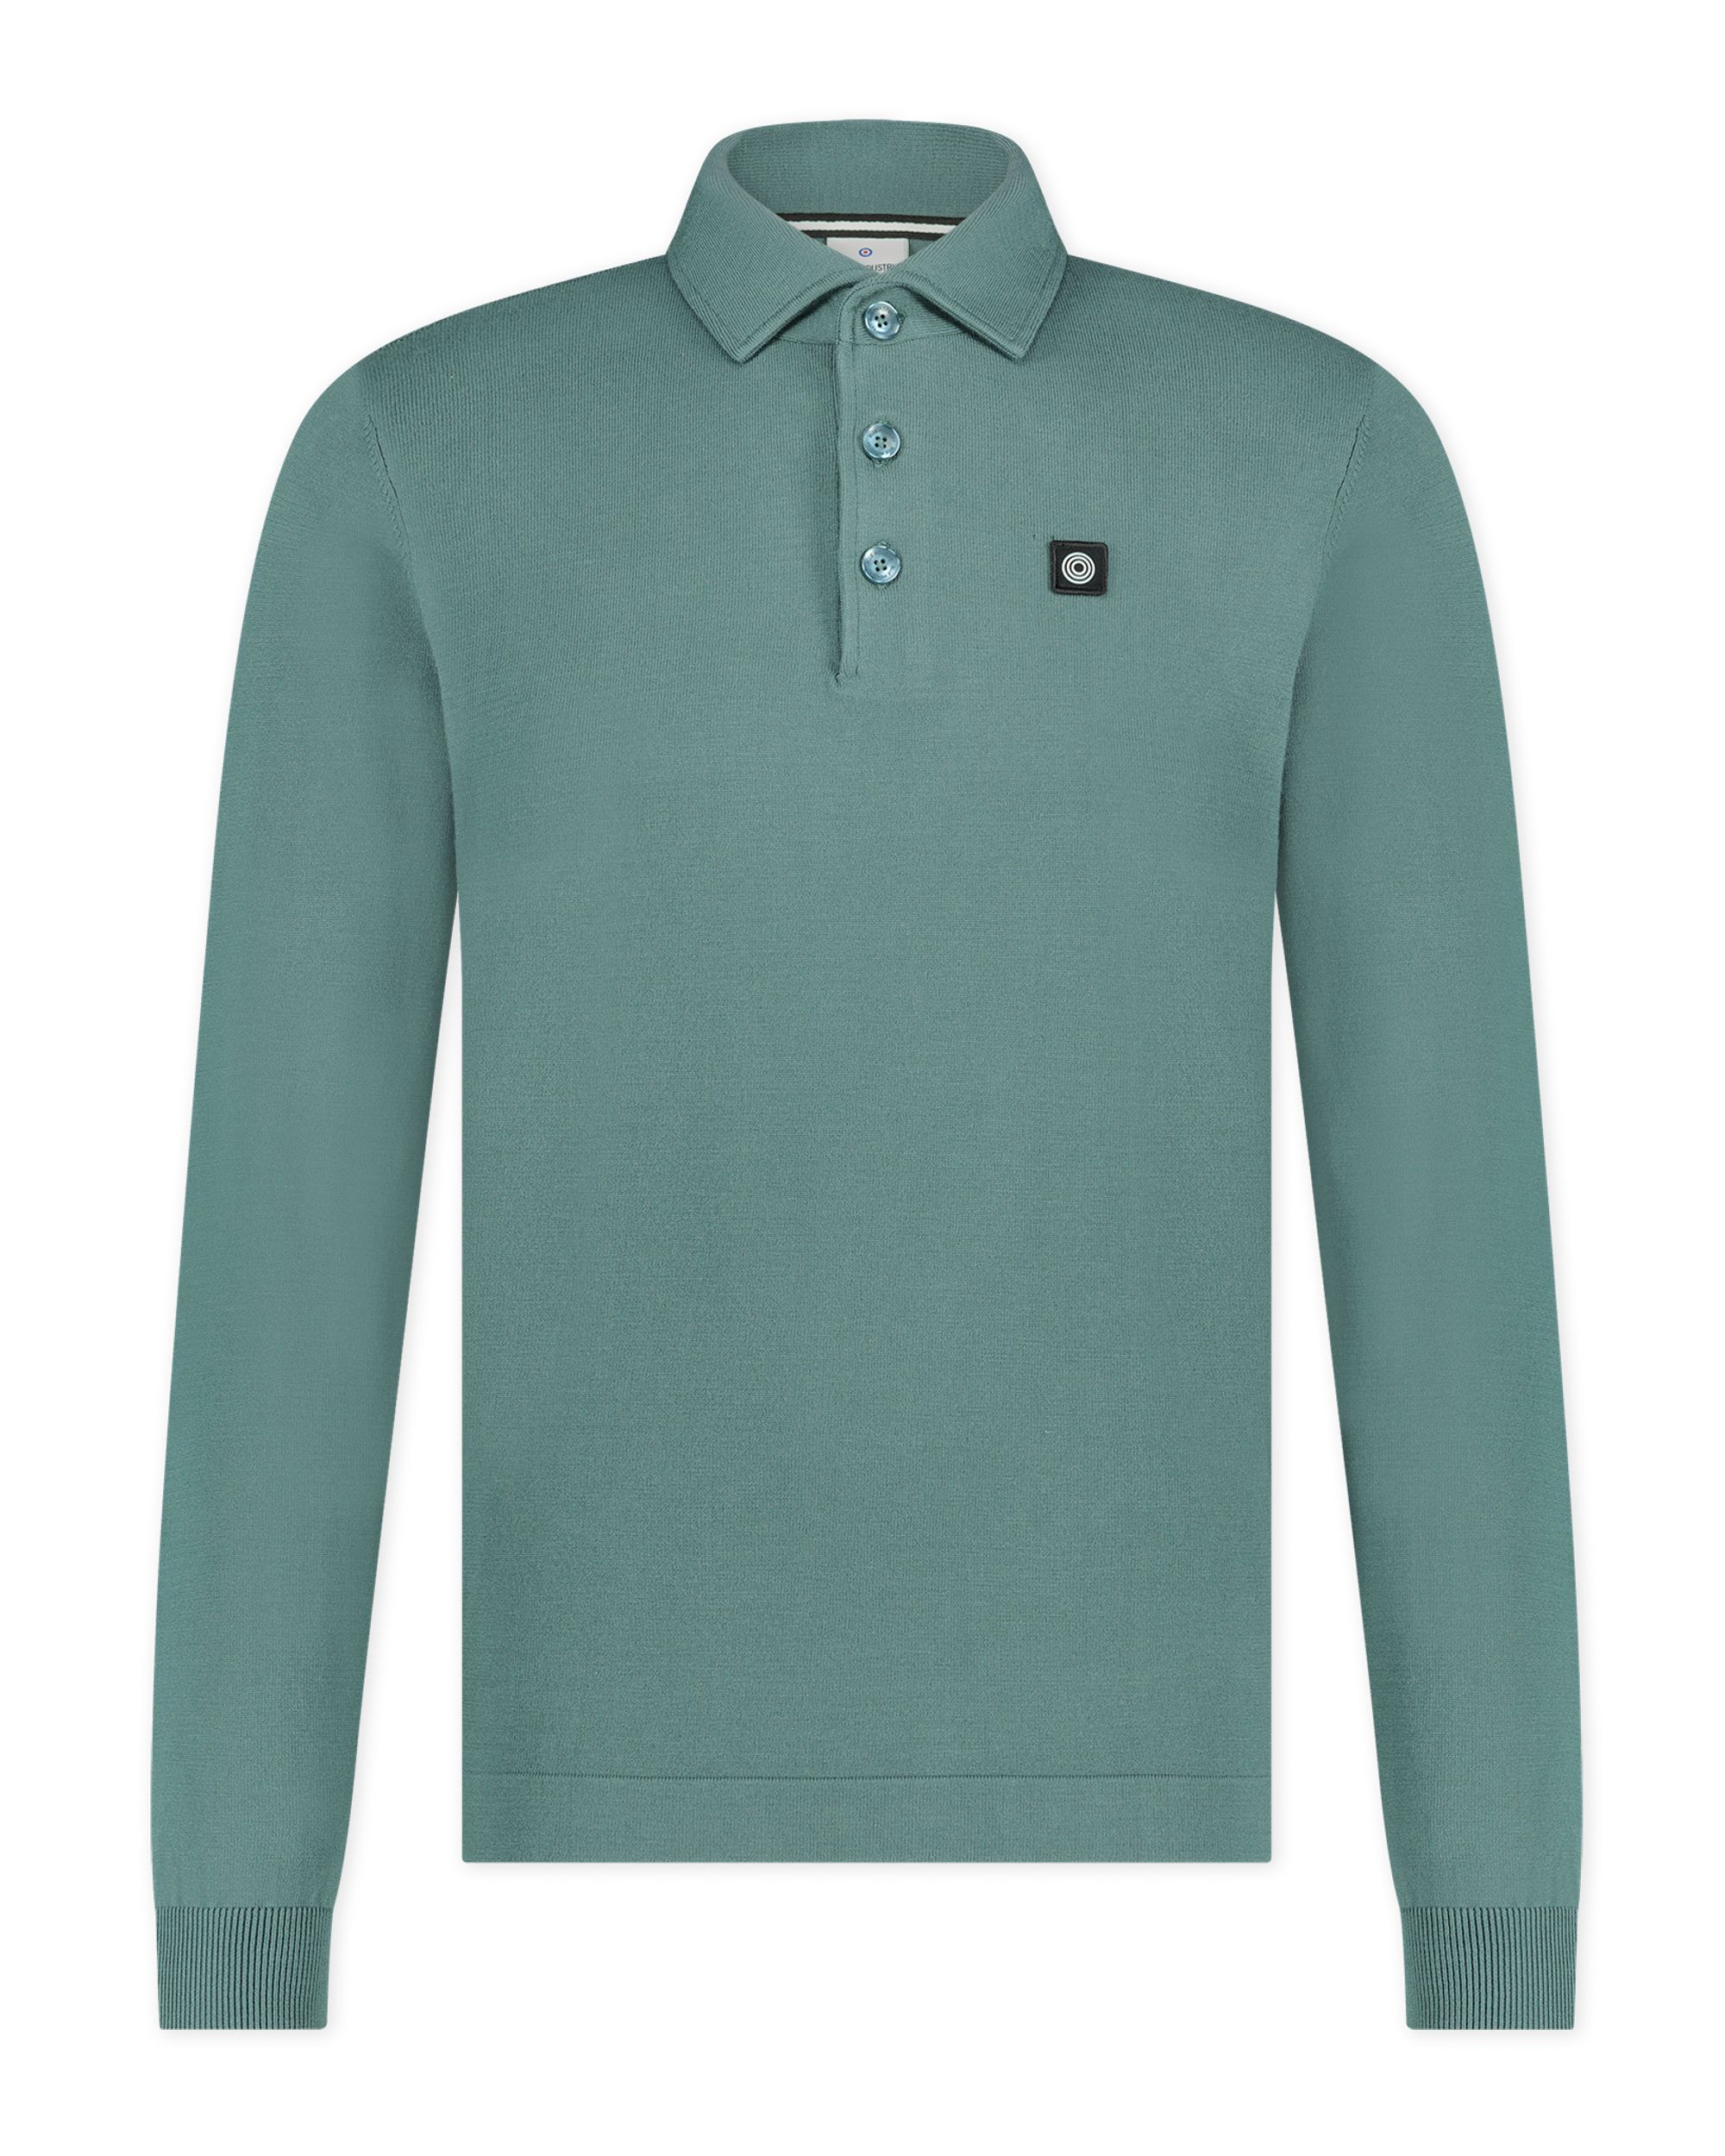 Blue Industry Polo LM Groen 091029-001-L